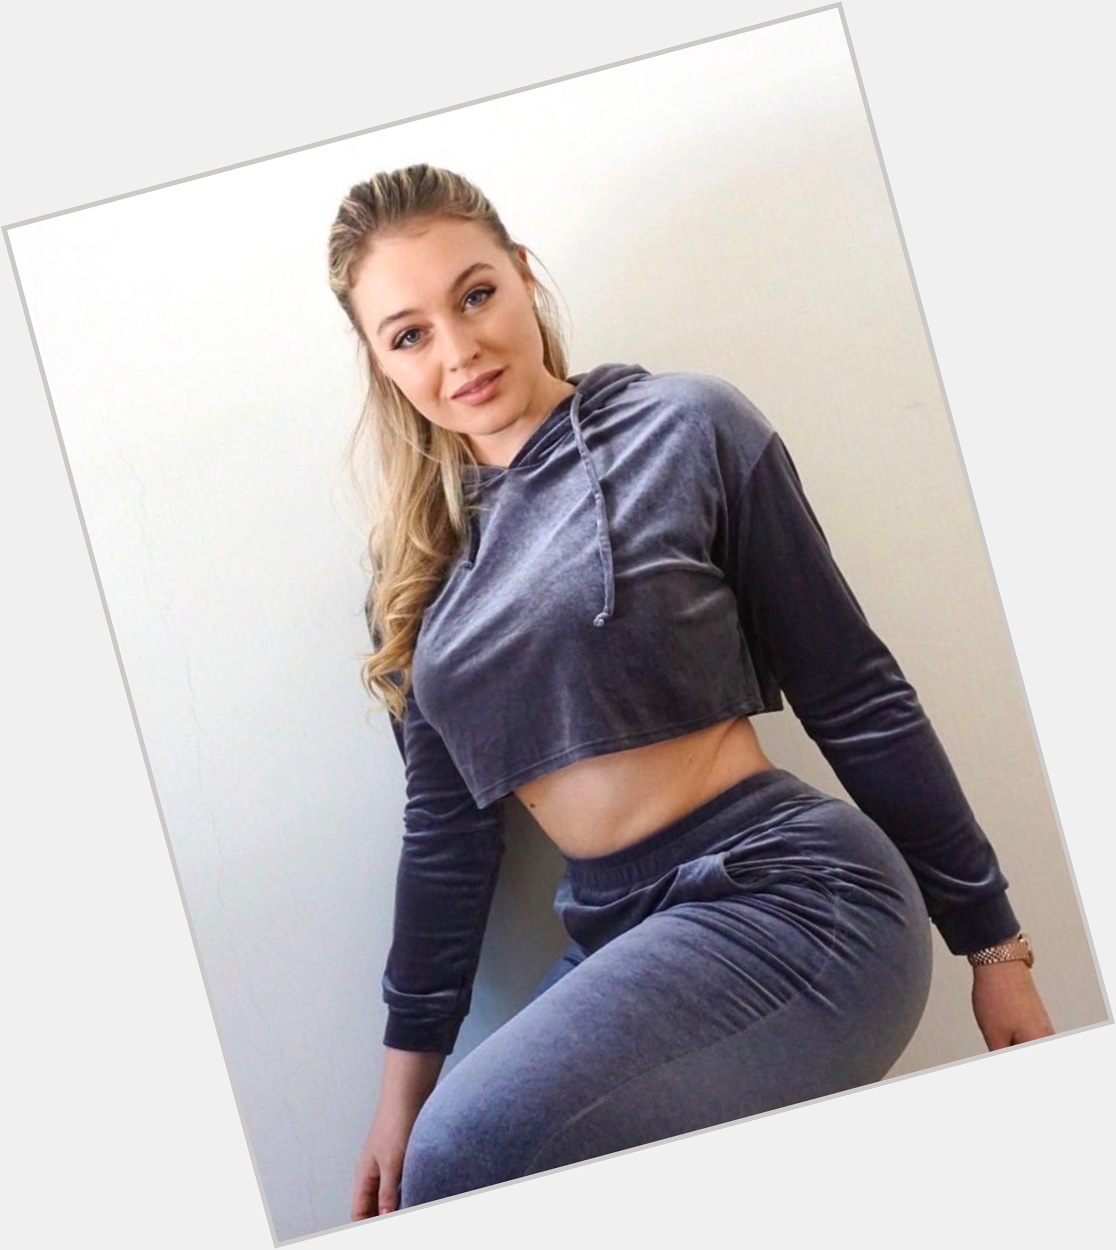 Iskra Lawrence Large body,  blonde hair & hairstyles